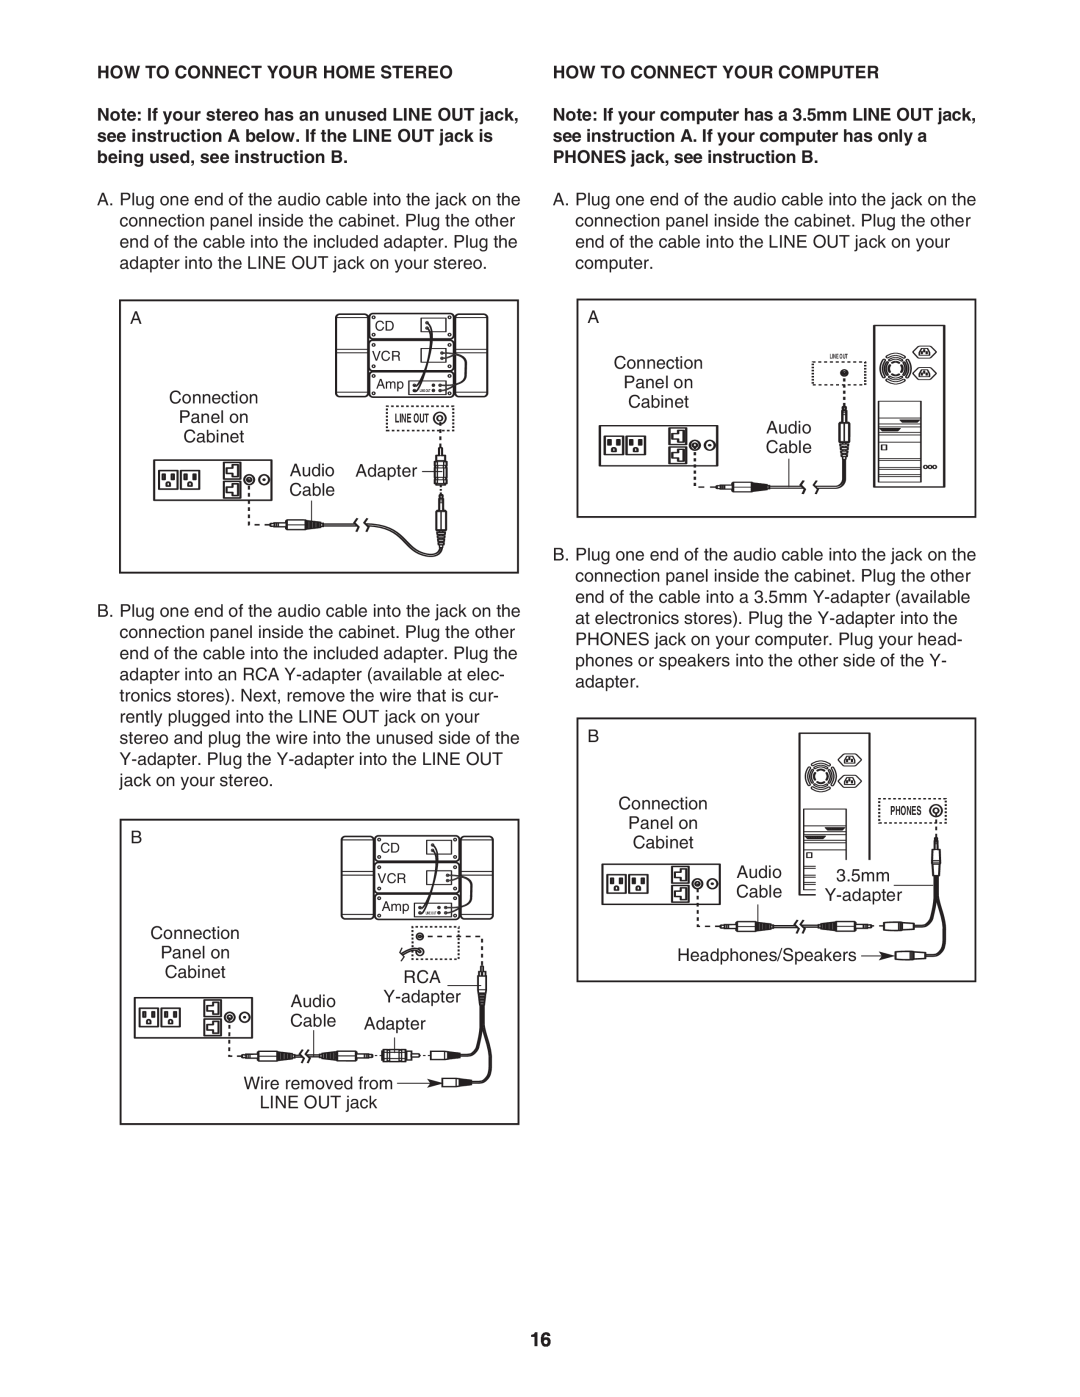 ProForm HGTL09111O, HGTL09111M user manual How To Connect Your Home Stereo, How To Connect Your Computer 